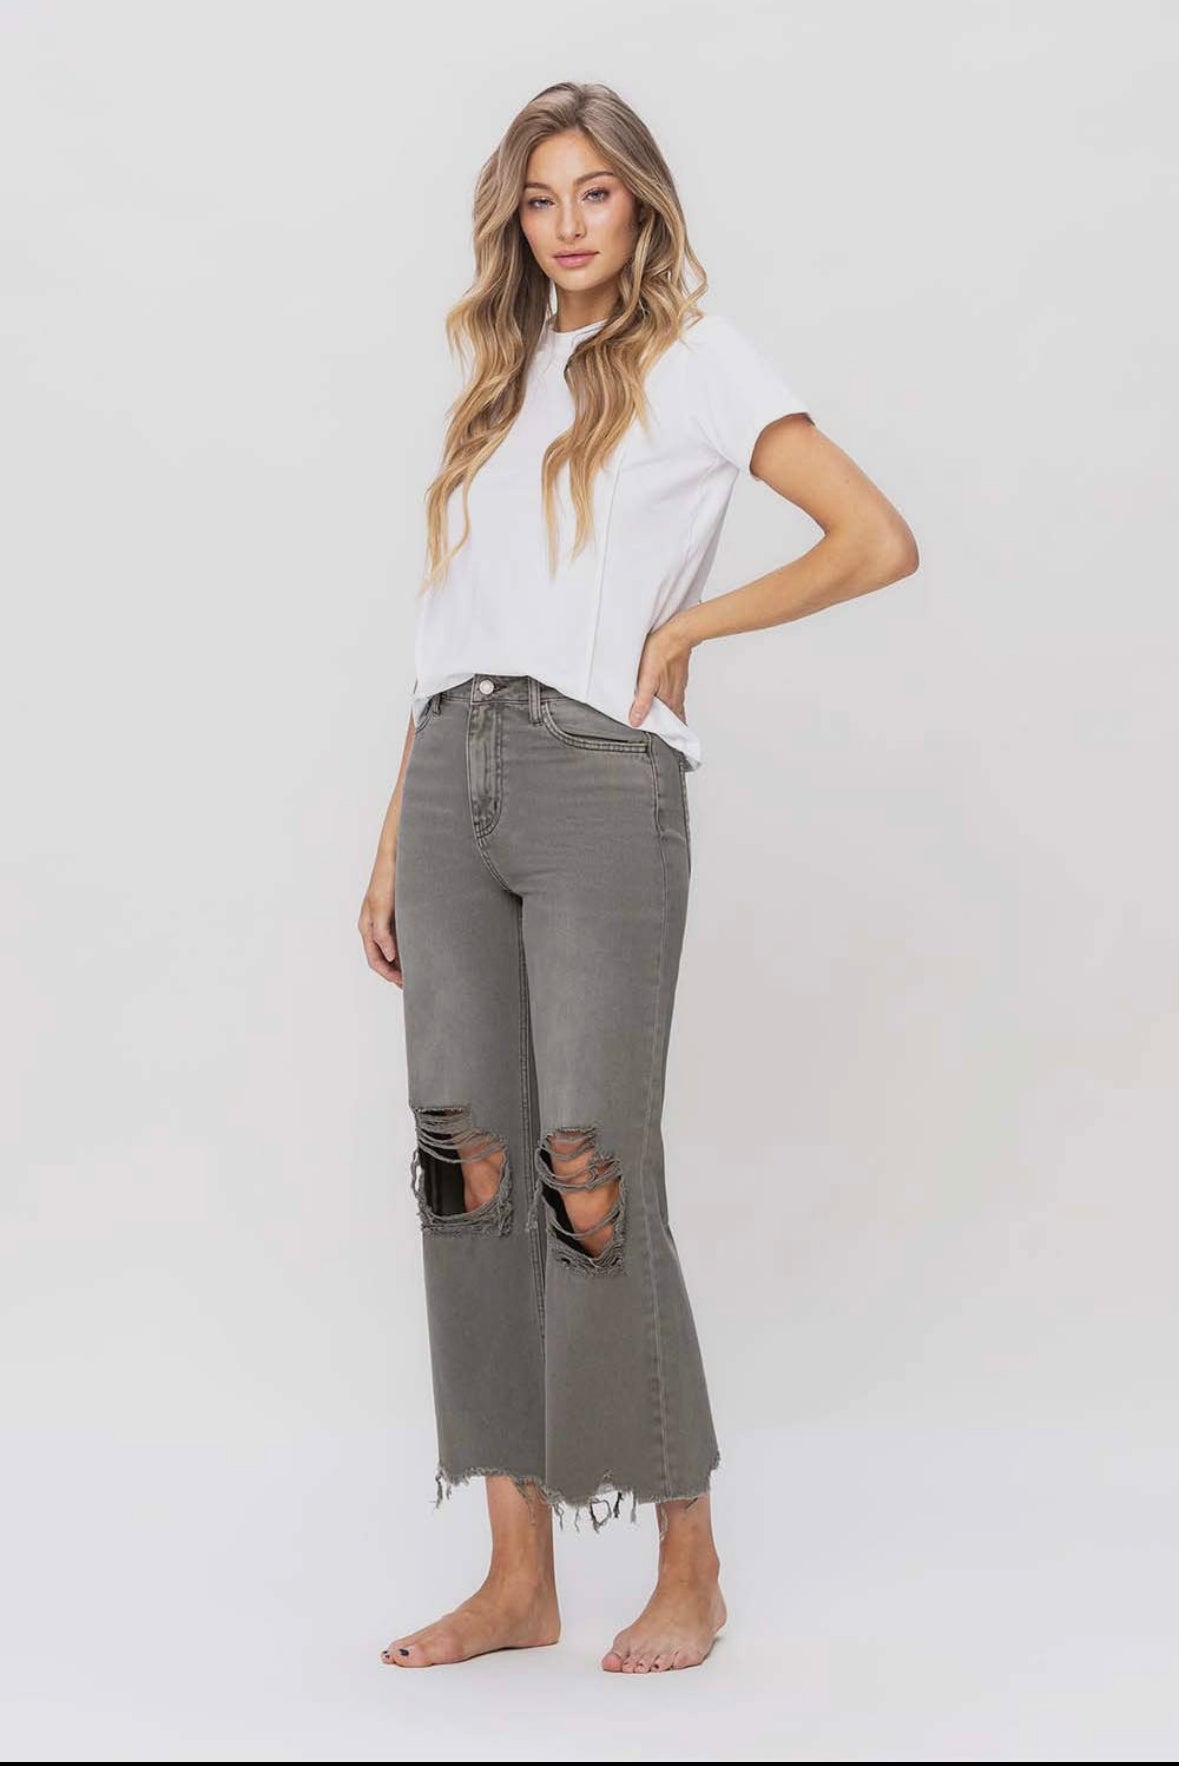 90s Vintage Flare Jeans in Bettle